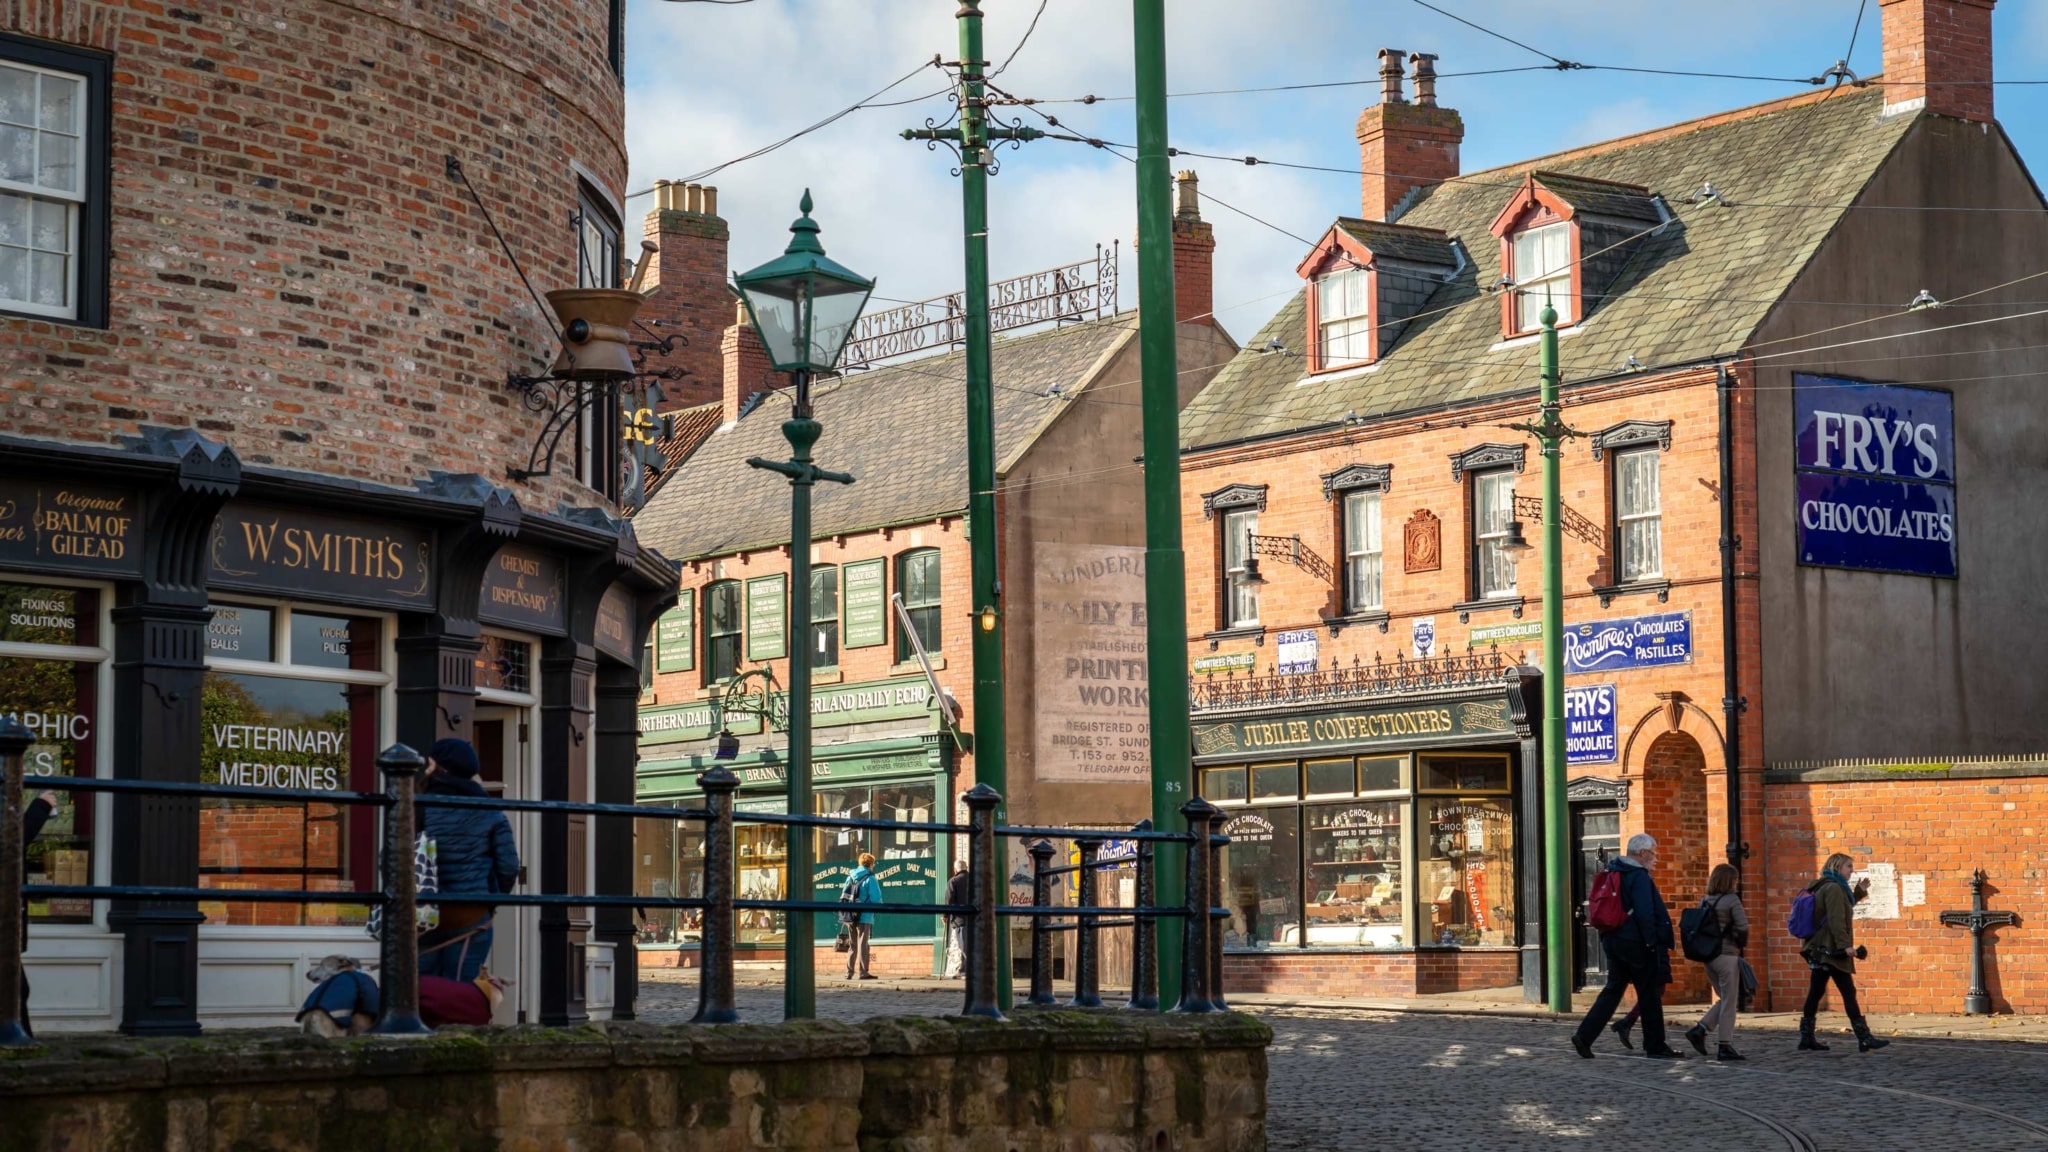 A street in Beamish Museum, with old fashioned shops and tram rails